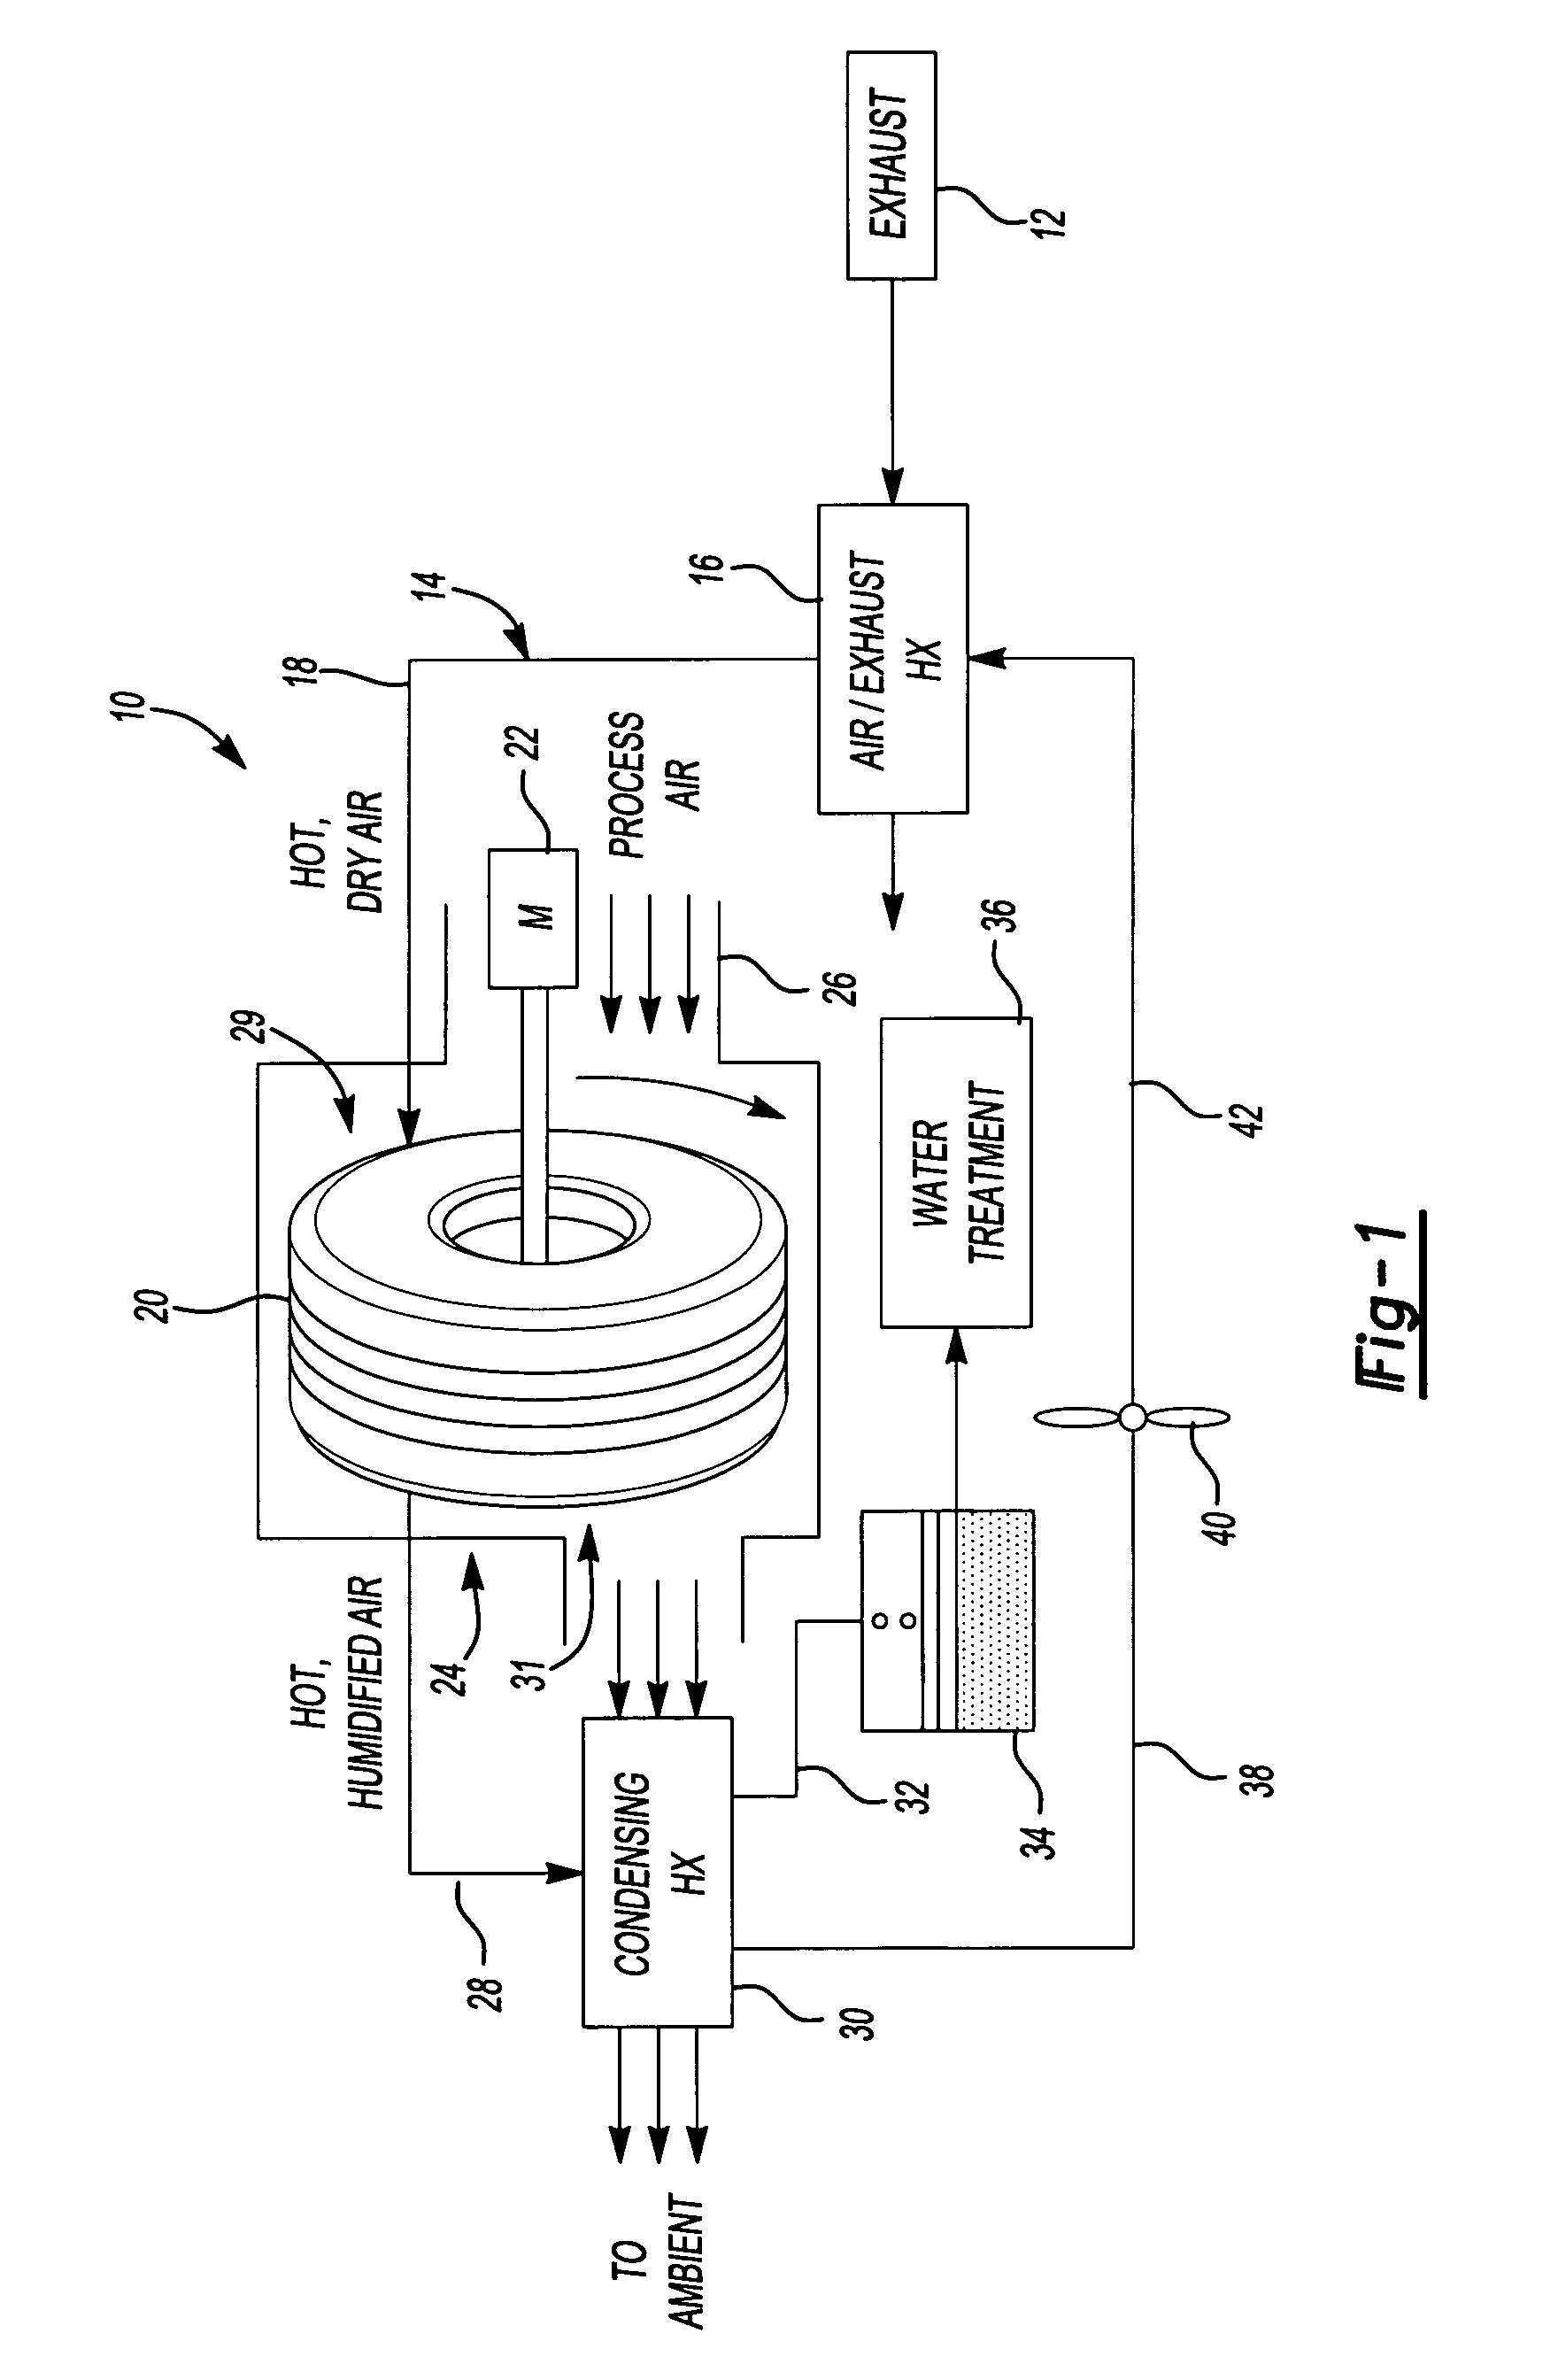 Water-from-air system using desiccant wheel and exhaust